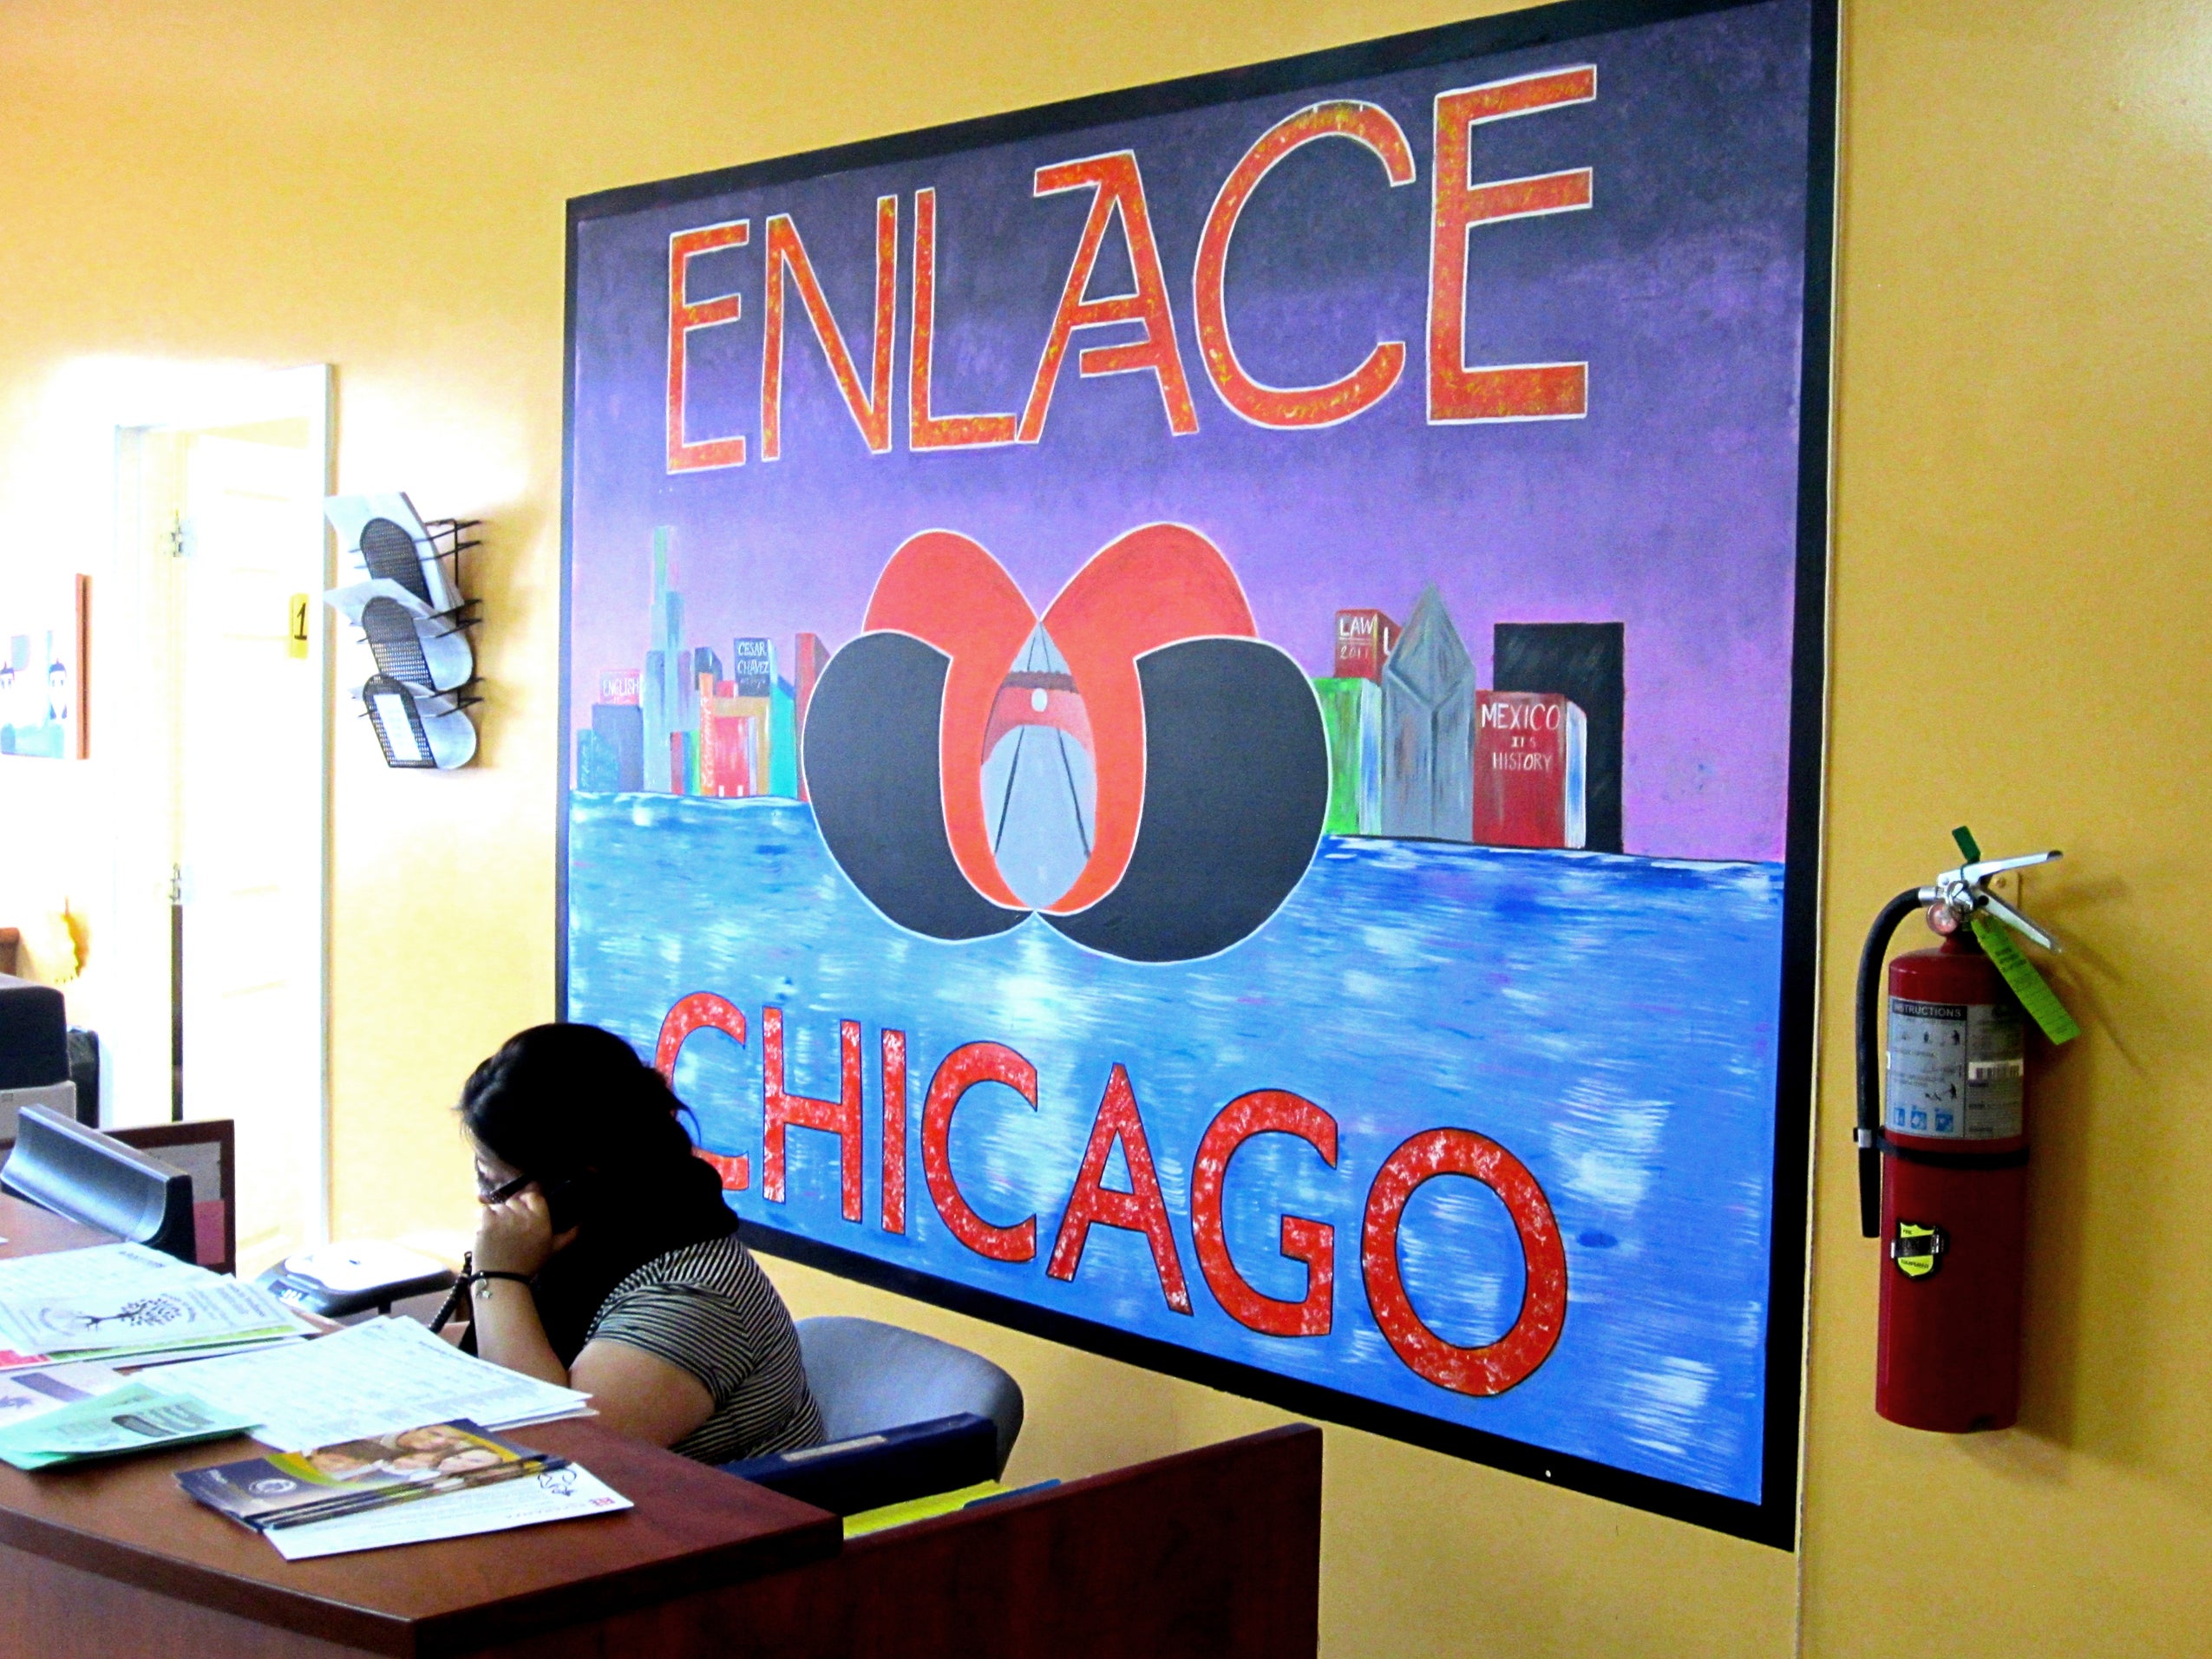 Mural with the words 'Enlace Chicago' on the wall behind a woman sitting at a desk